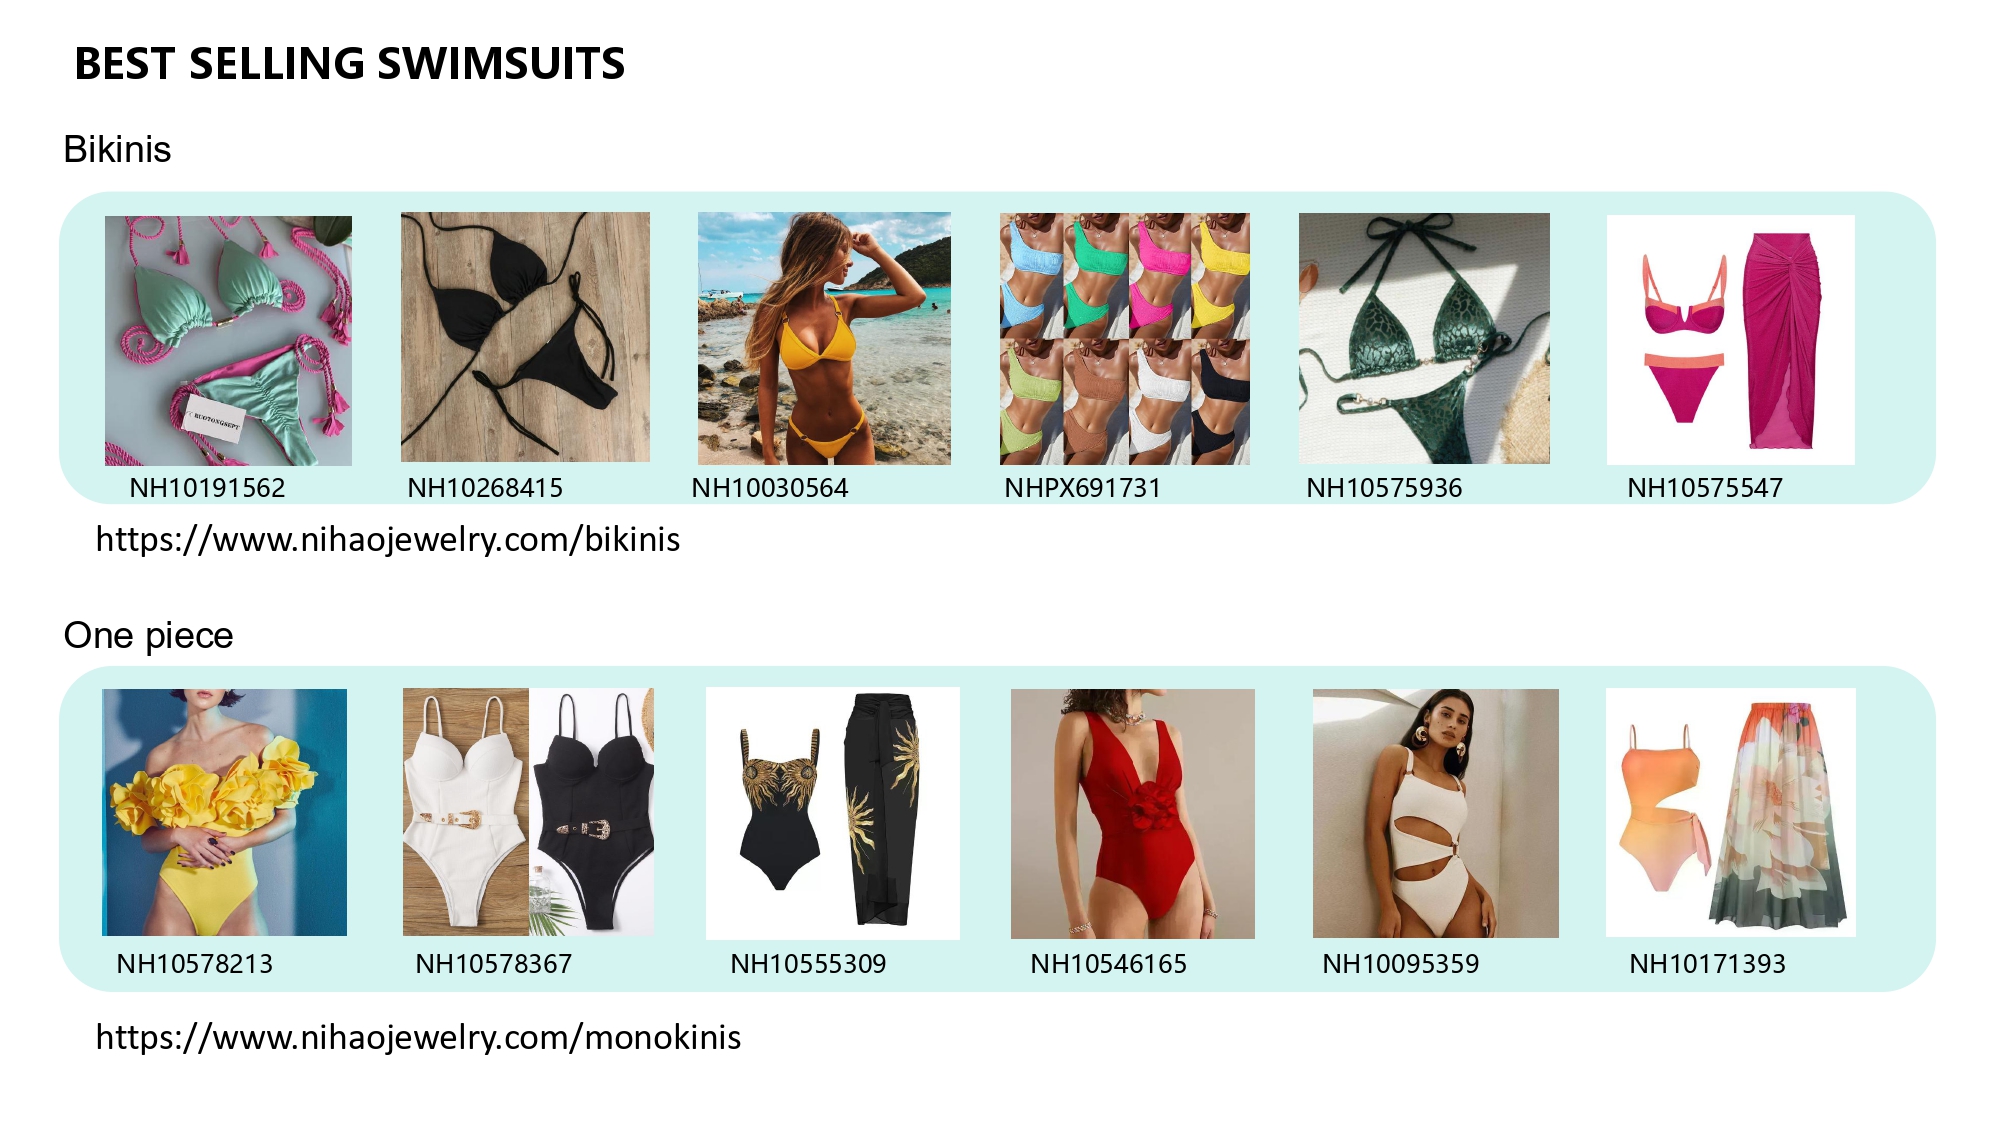 best selling swimsuits from Nihaojewelry.